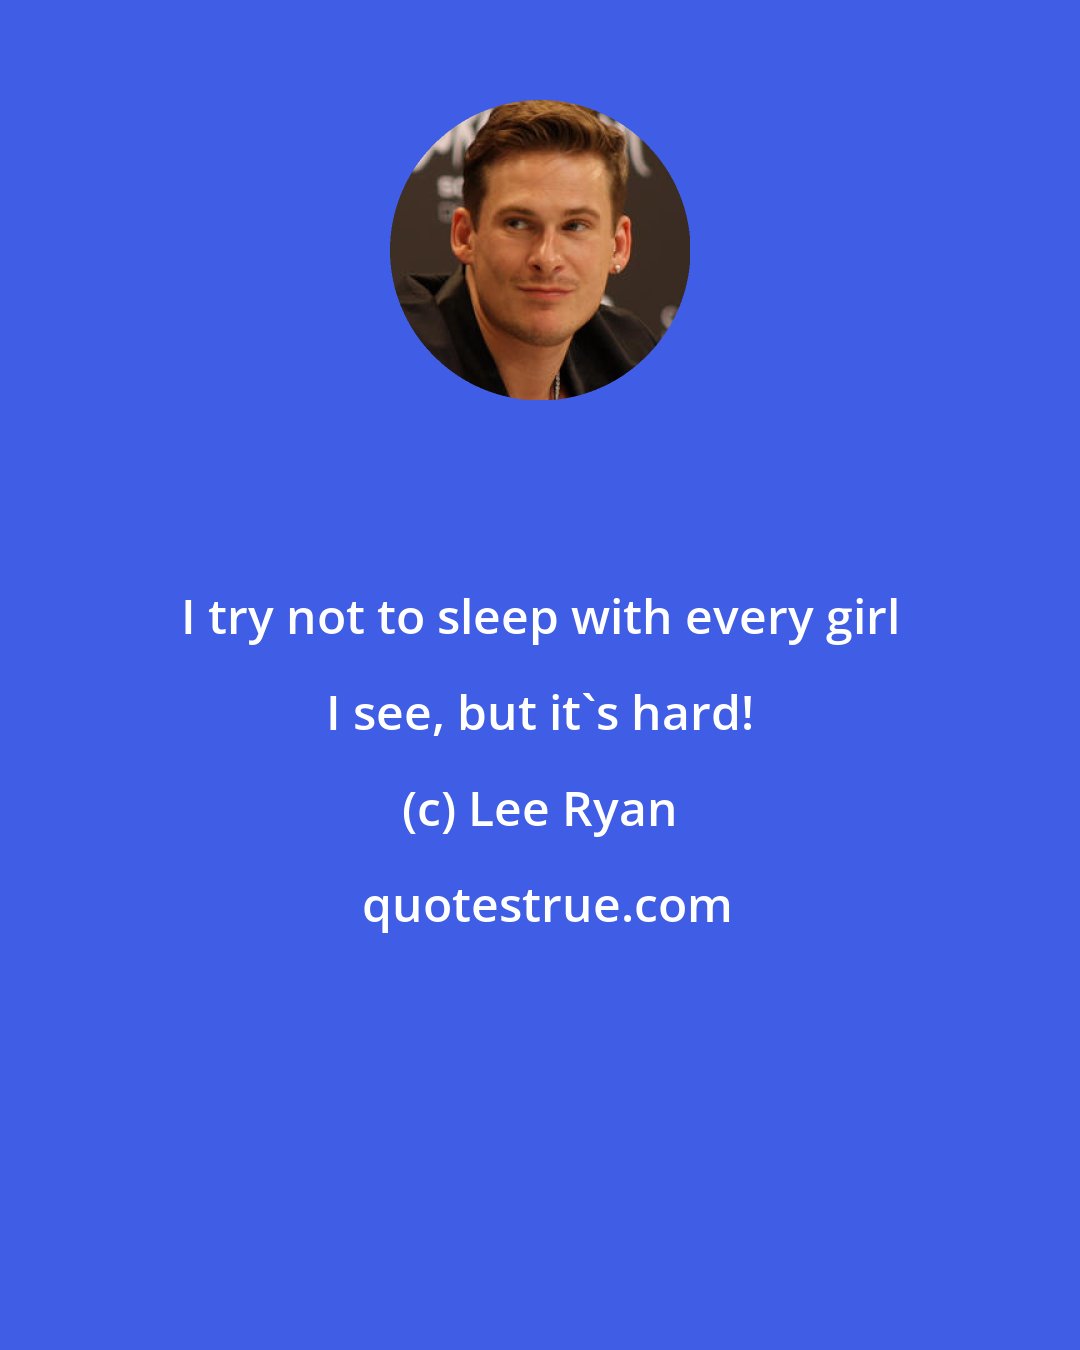 Lee Ryan: I try not to sleep with every girl I see, but it's hard!